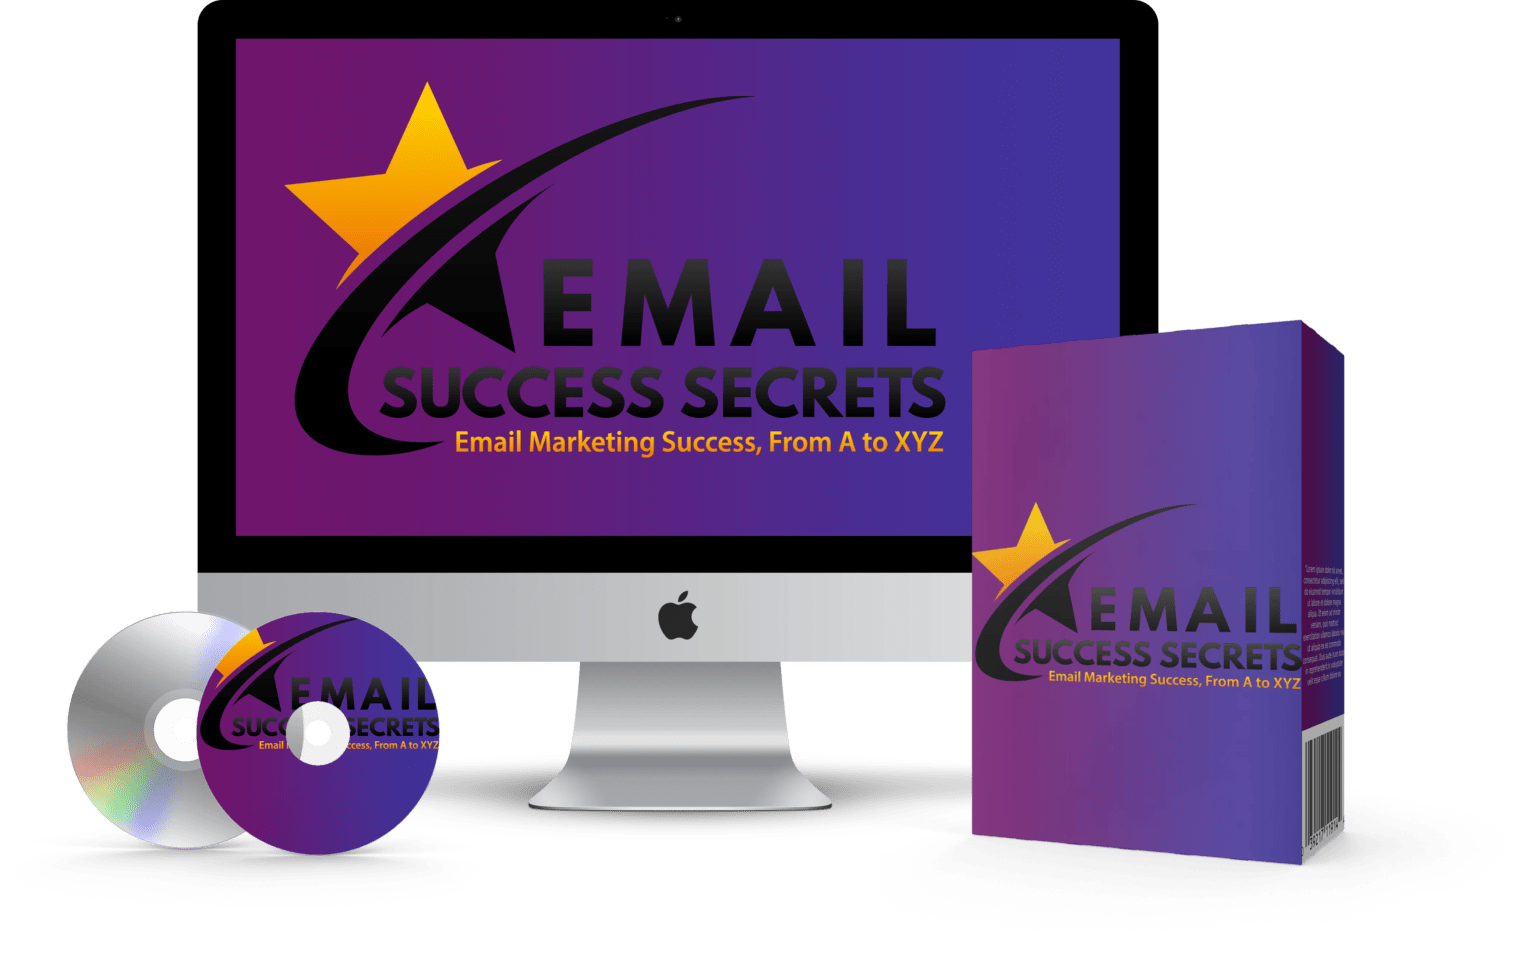 [GET] Email Success Secrets – Over 800 BUYERS LEADS and $1349 From 5 MINUTES of WORK Free Download